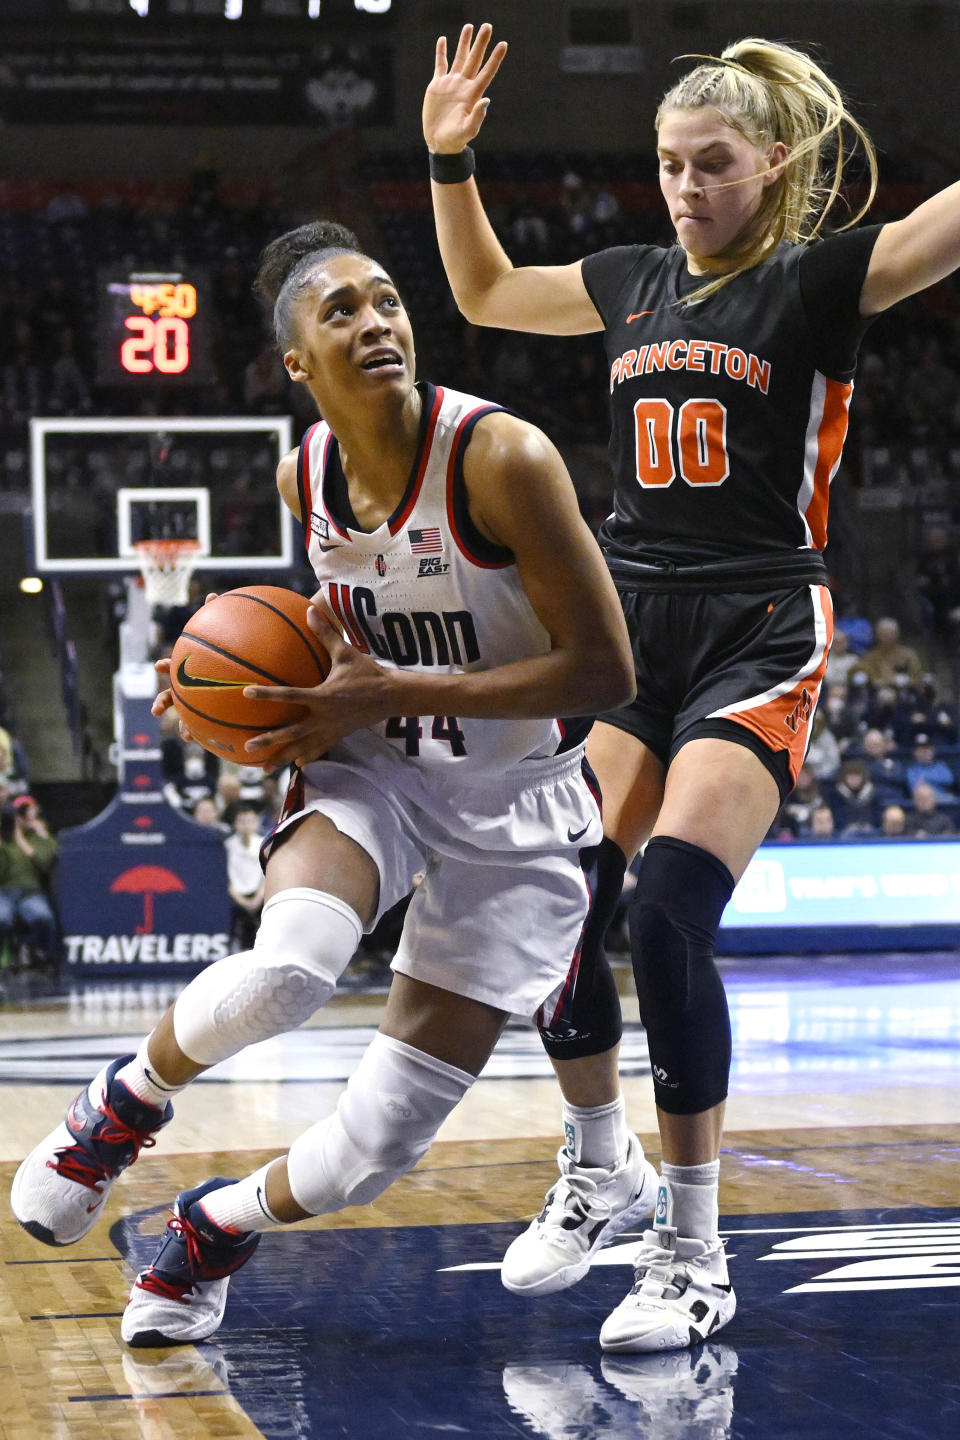 Connecticut's Aubrey Griffin (44) drives to the basket as Princeton's Ellie Mitchell (00) defends during the first half of an NCAA college basketball game Thursday, Dec. 8, 2022, in Storrs, Conn. (AP Photo/Jessica Hill)